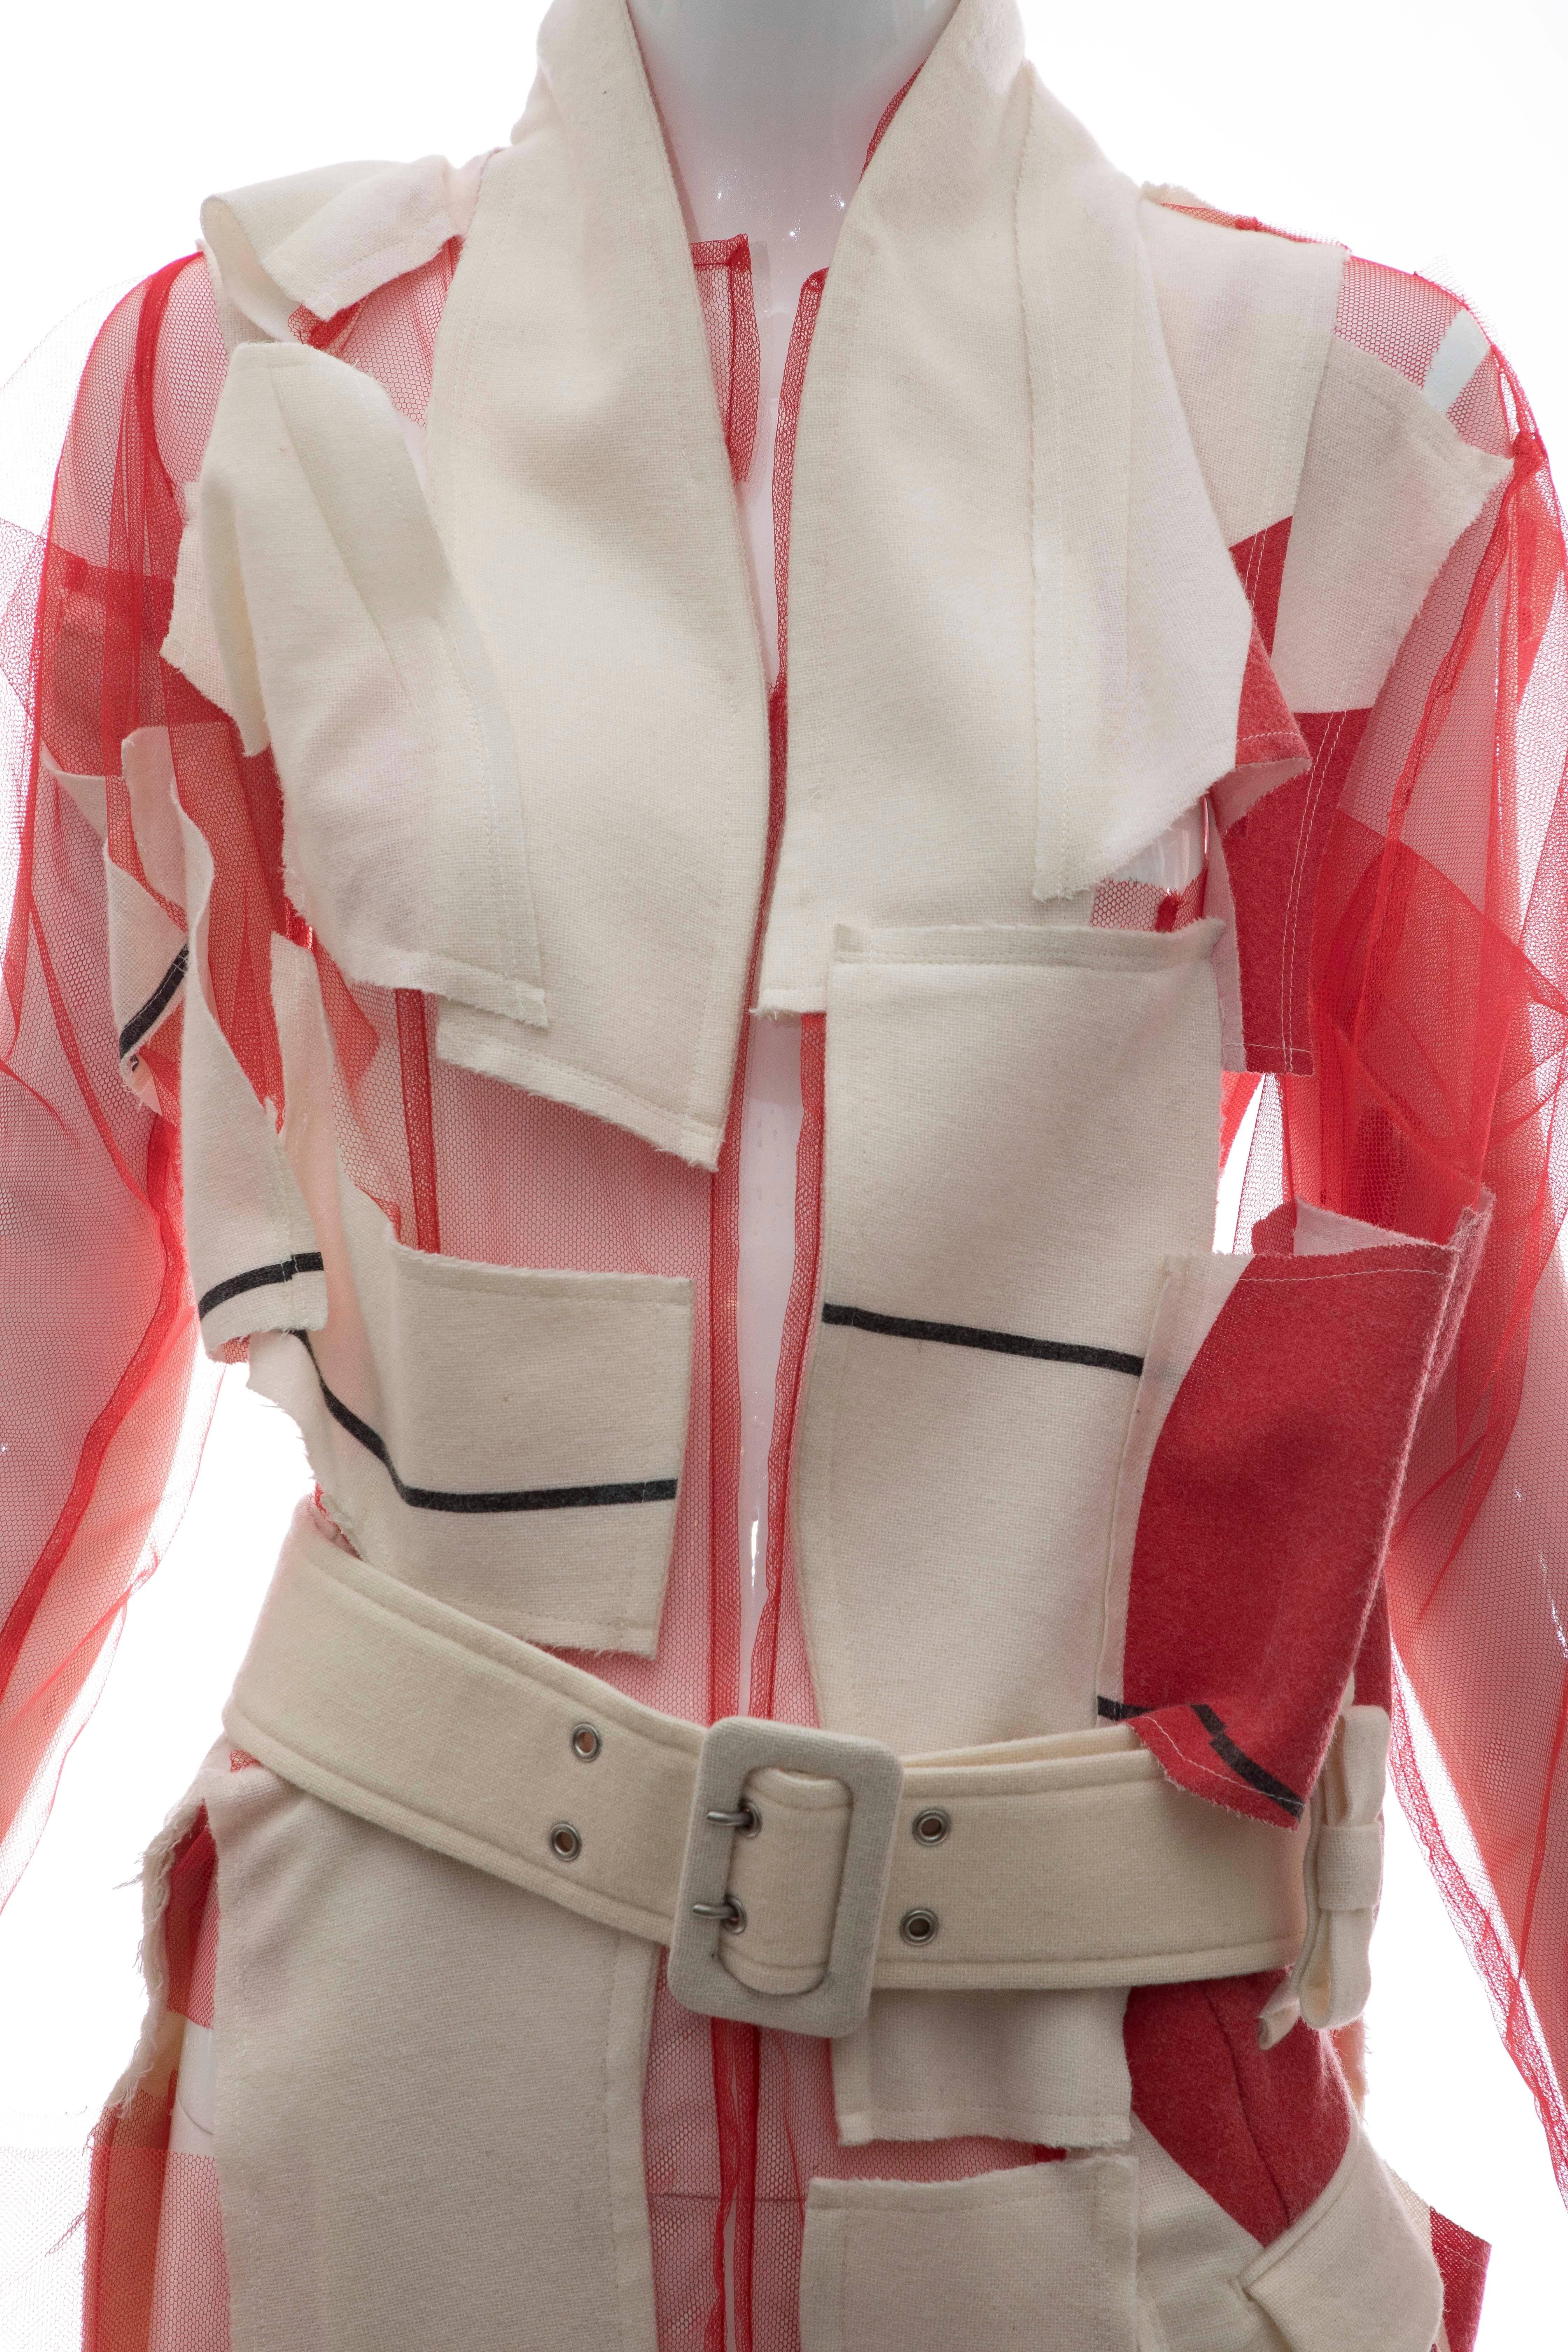 Comme des Garcons Deconstructed Red Mesh Jacket Cream Wool Patchwork, Spring 2007 5